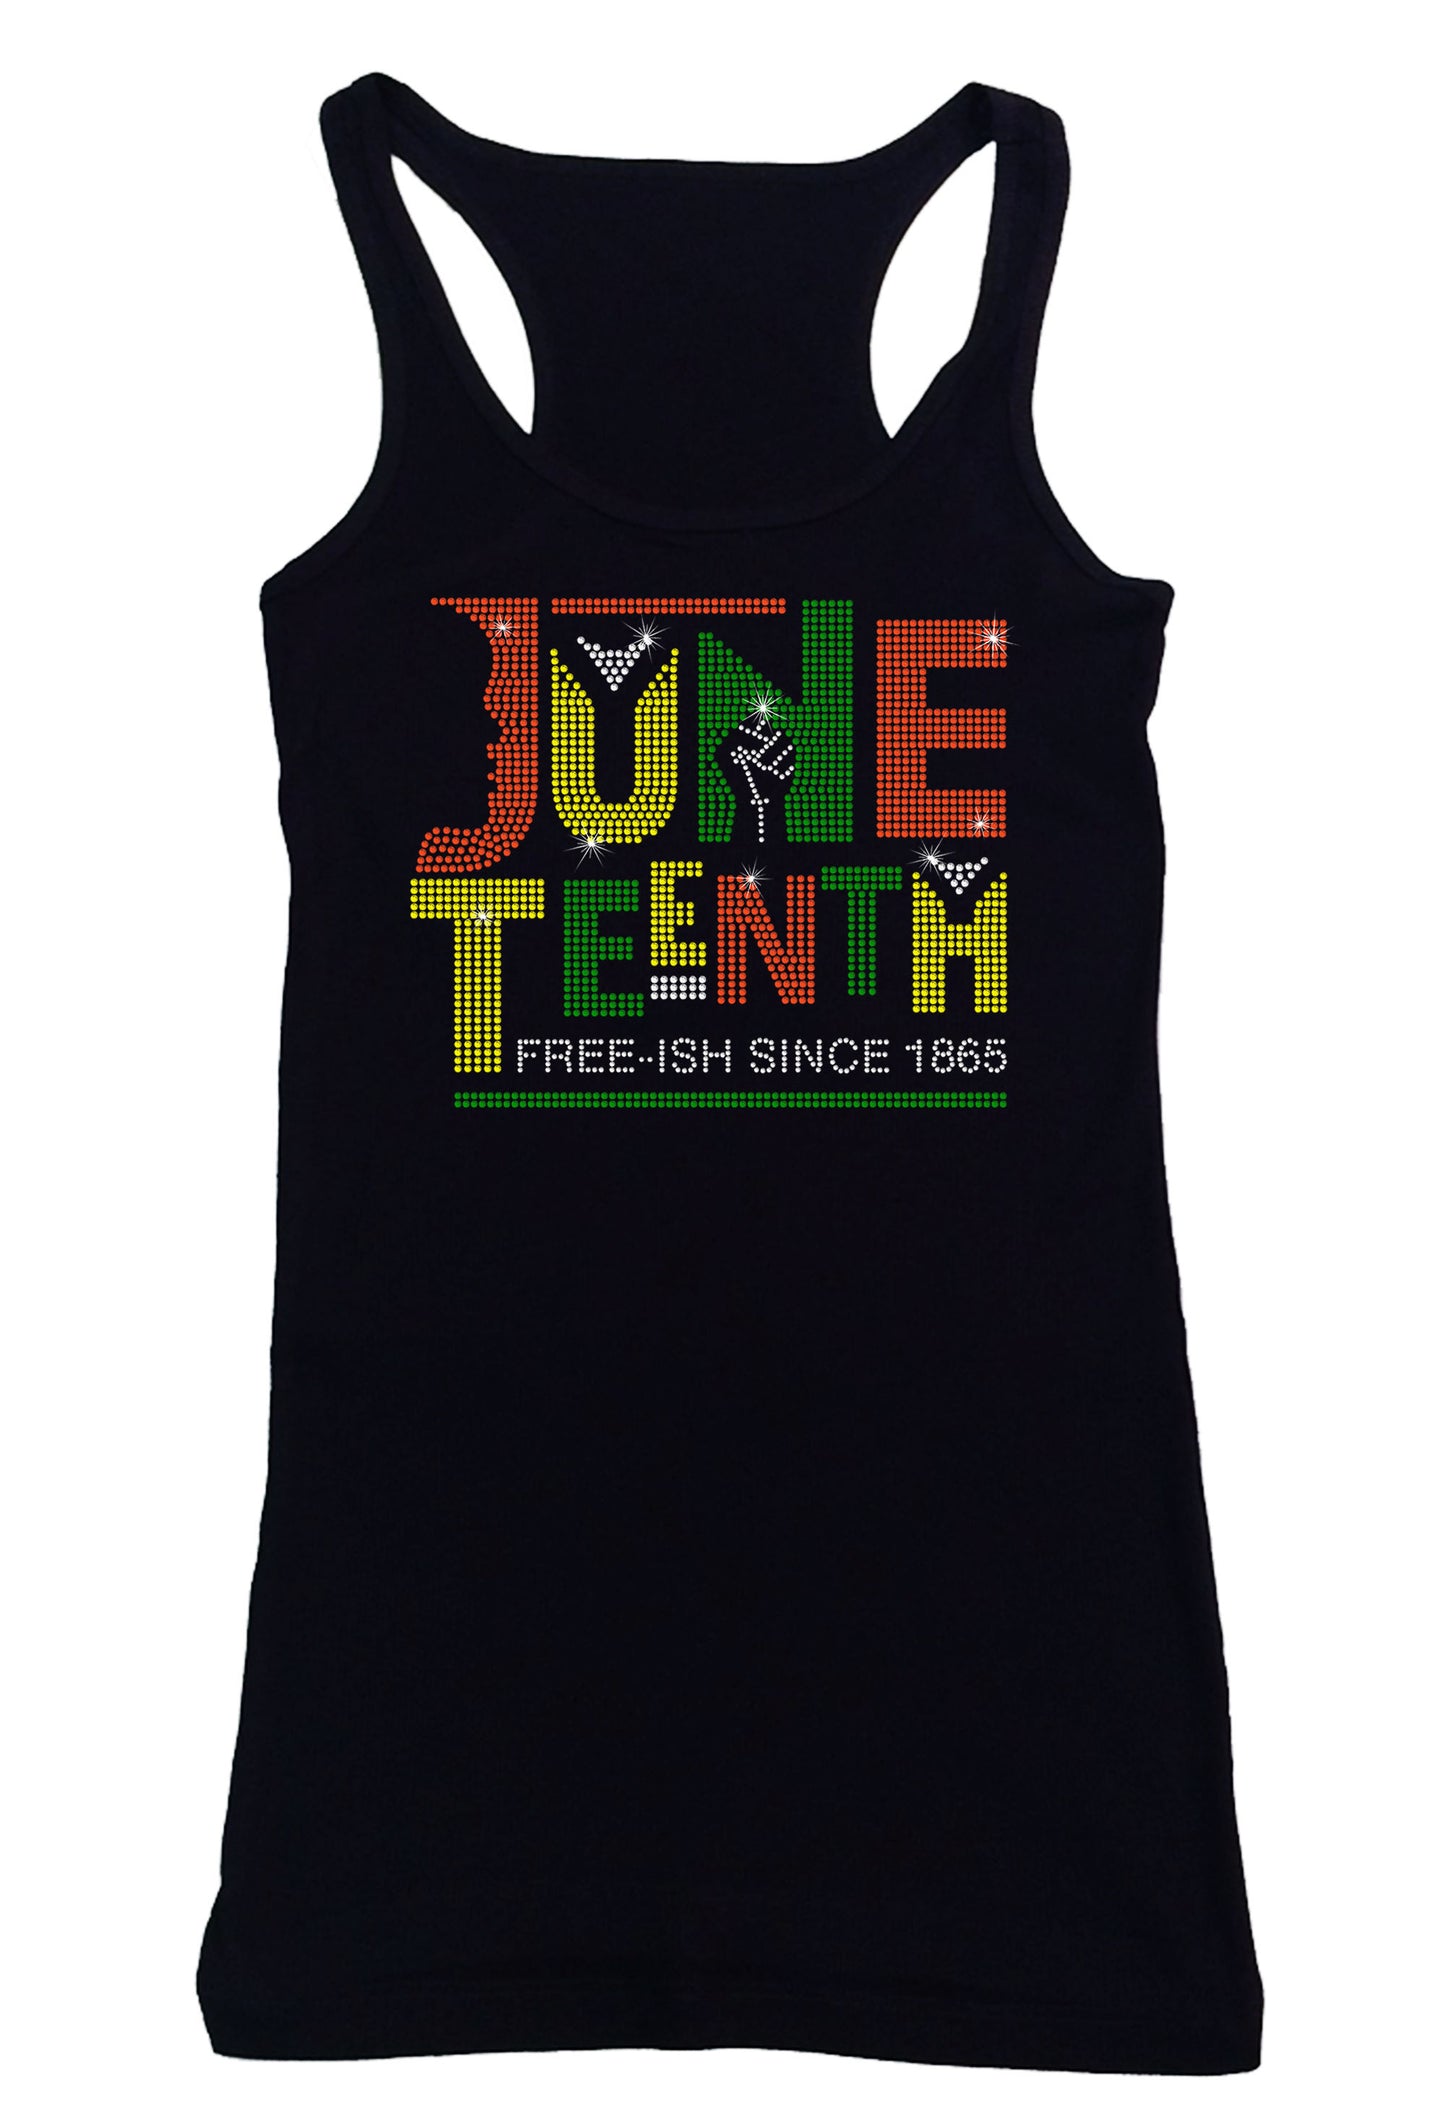 Women's Rhinestone Fitted Tight Snug Juneteenth Free-ish Since 1865 - Juneteenth Shirt with Fist